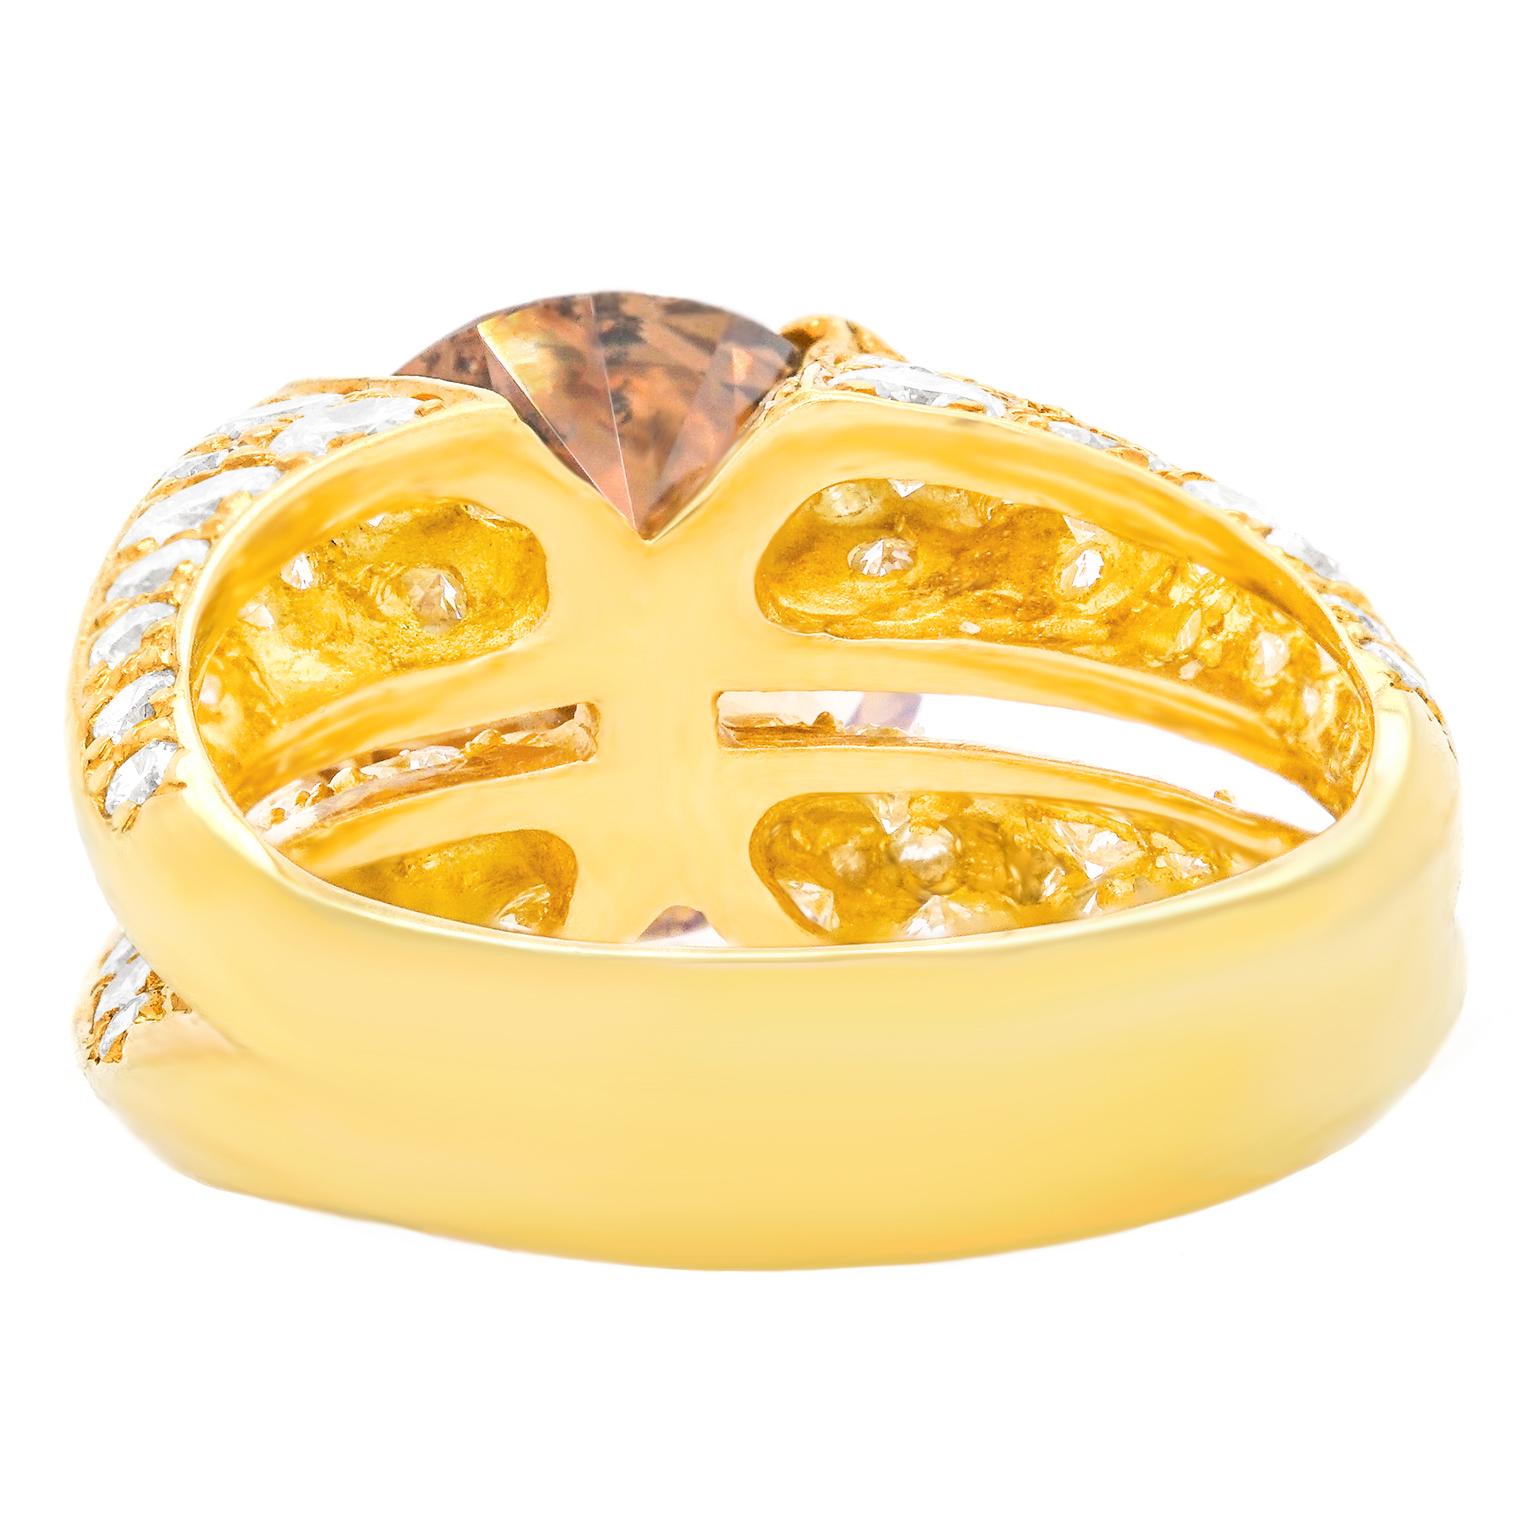 Spectacular Gold Ring by Jose Hess with 4.17 Carat Fancy Diamond GIA For Sale 1